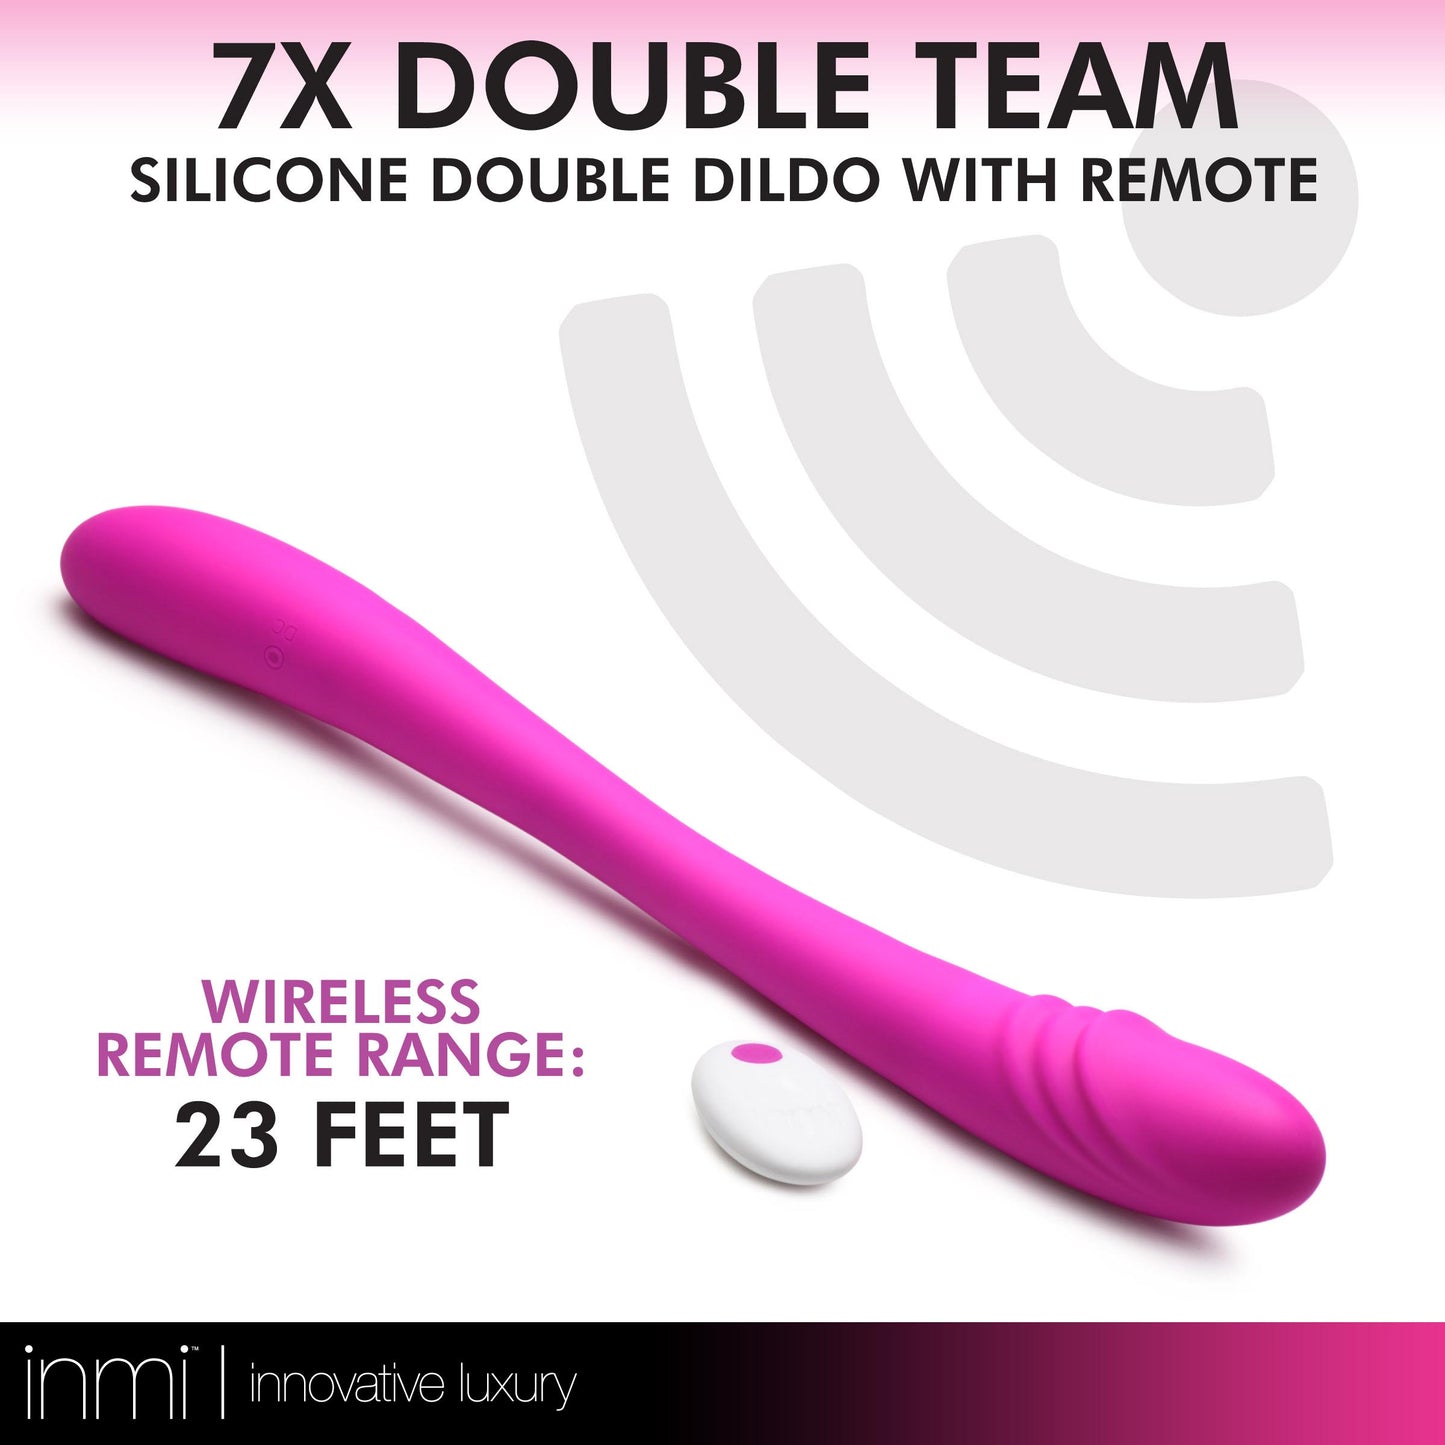 7X Double Team Silicone Double Dildo with Remote